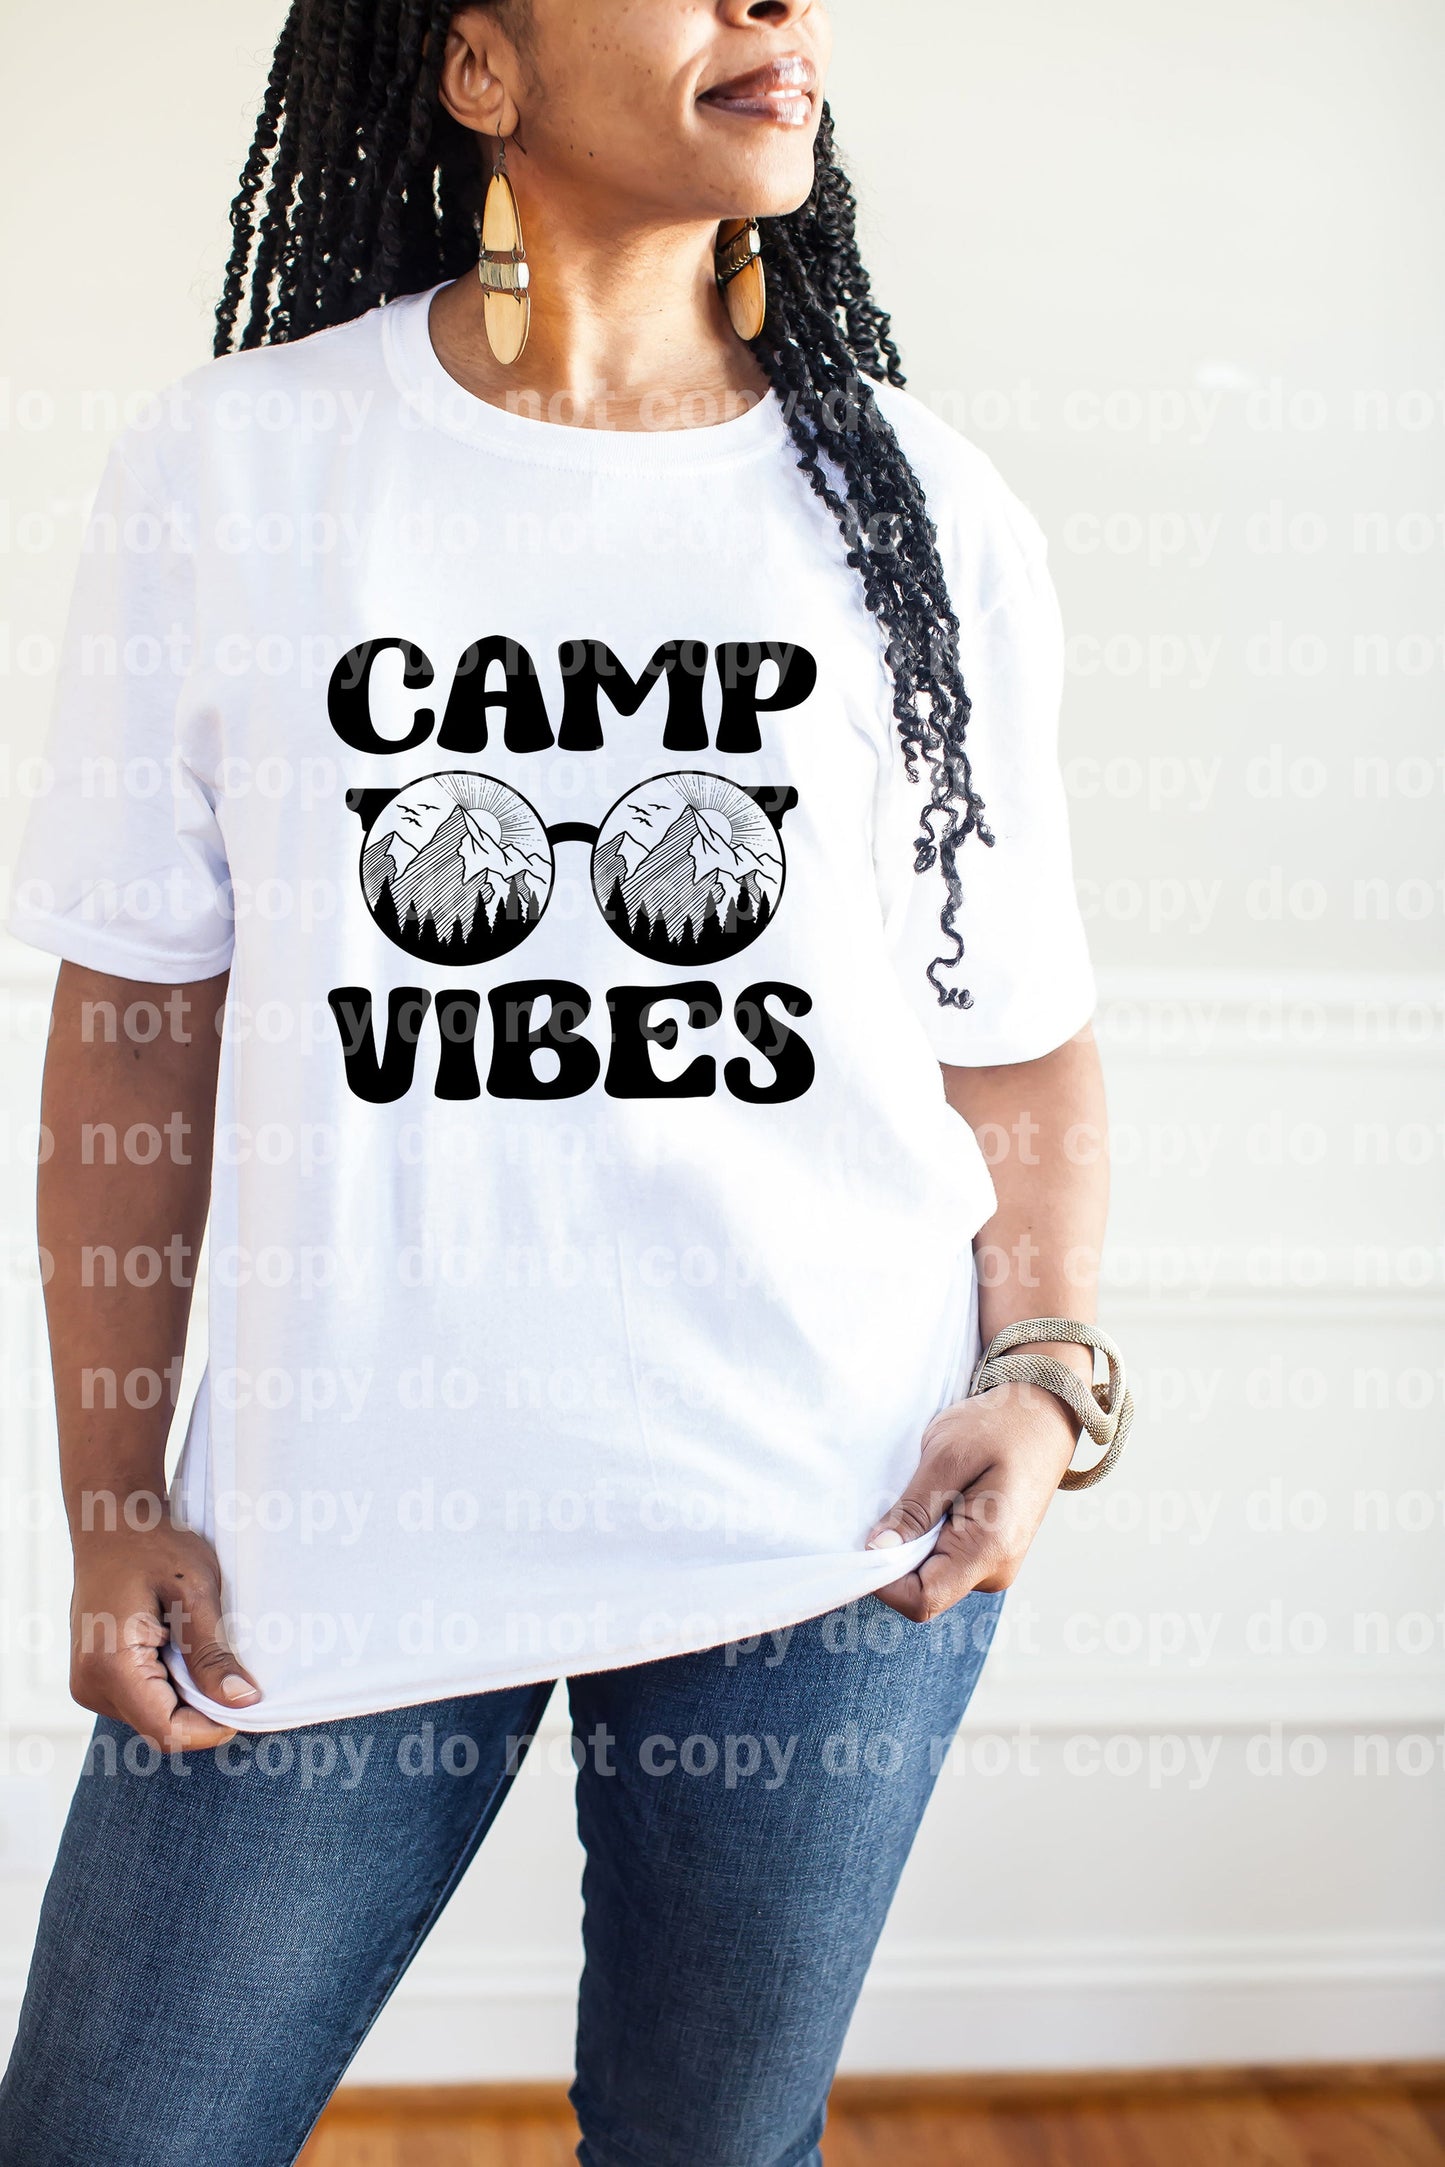 Camp Vibes Dream Print or Sublimation Print